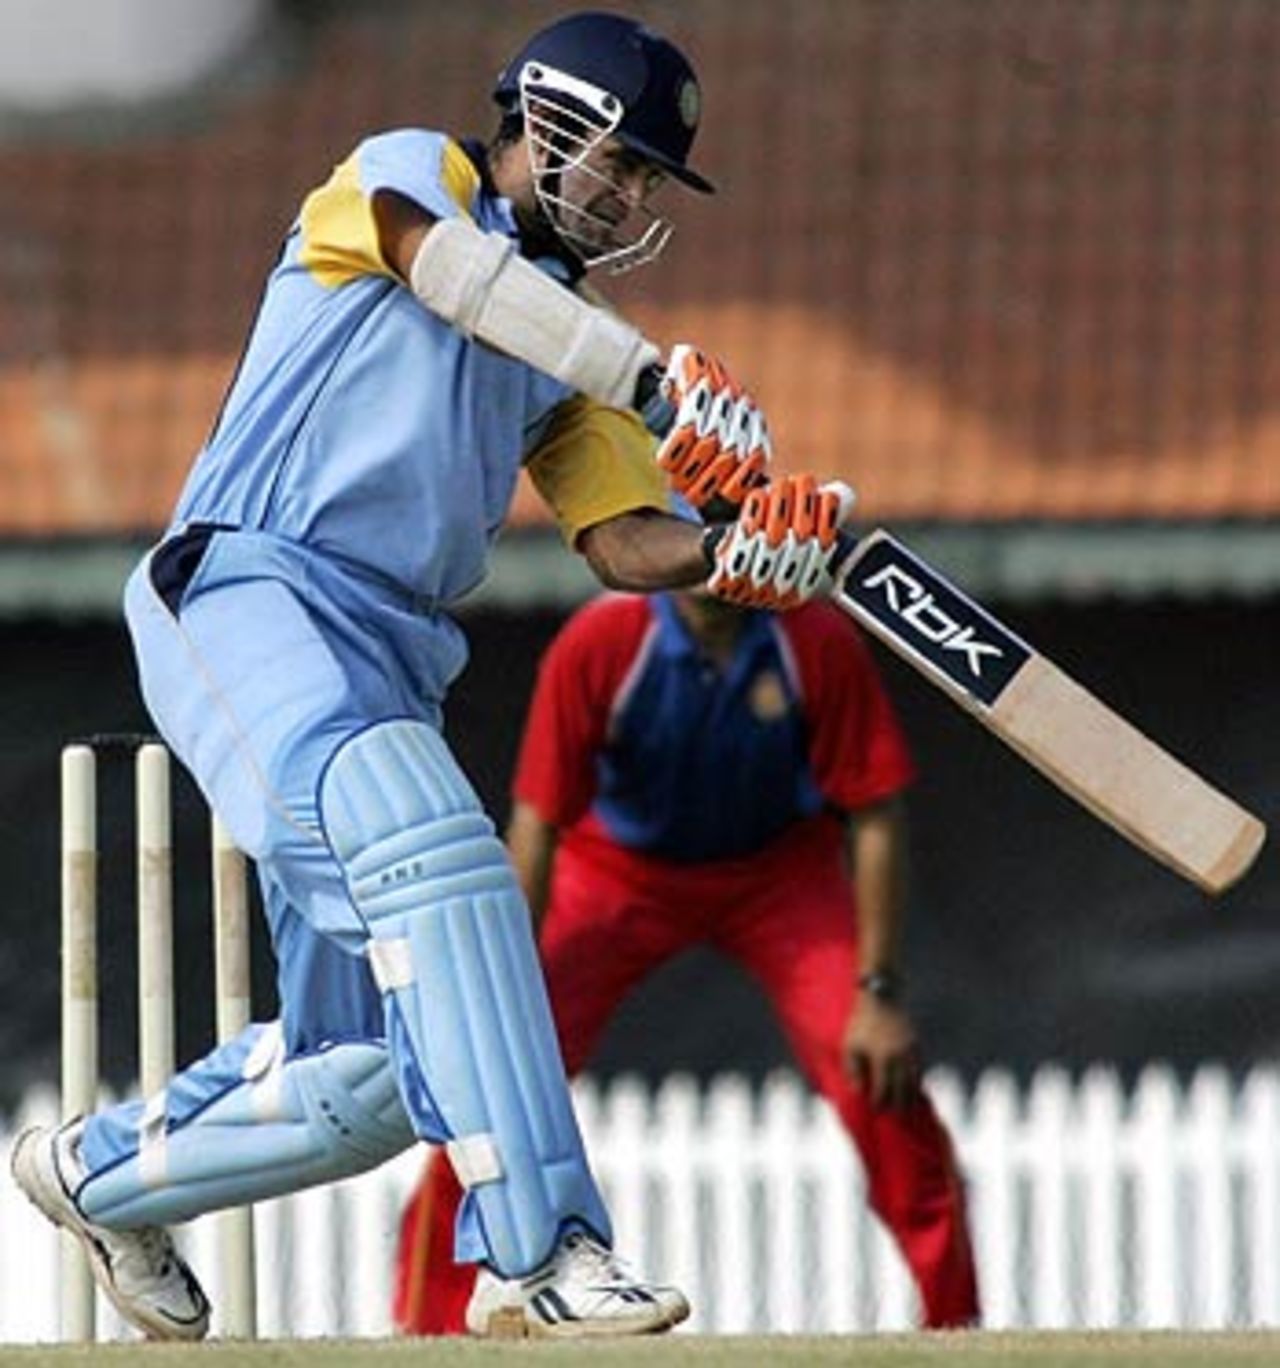 Irfan Pathan slams a four during his brief appearance, India Blue v India Red, Final, Challenger Series, Chennai, October 4, 2006